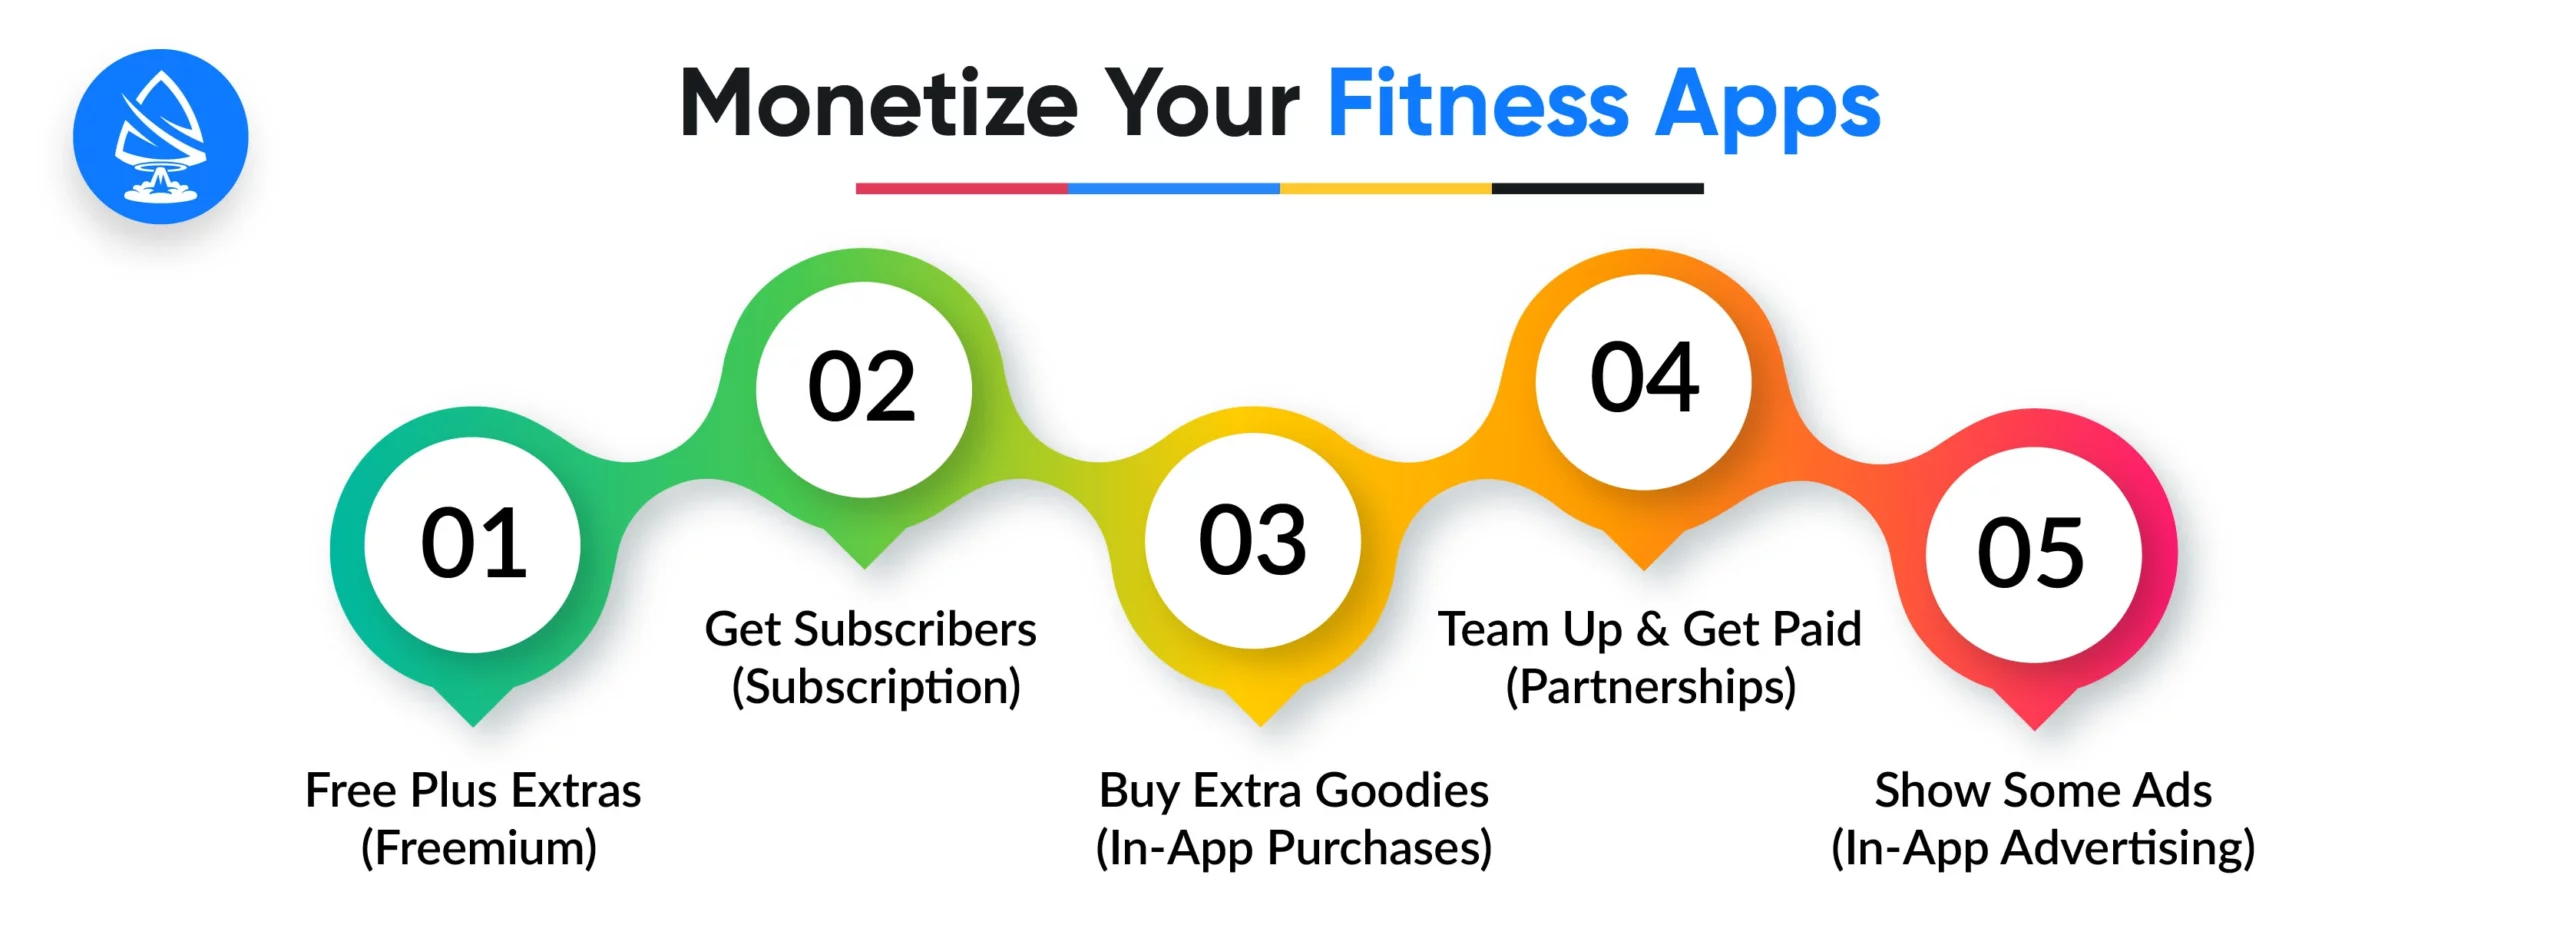 Make Money with Your Fitness App: Easy Strategies